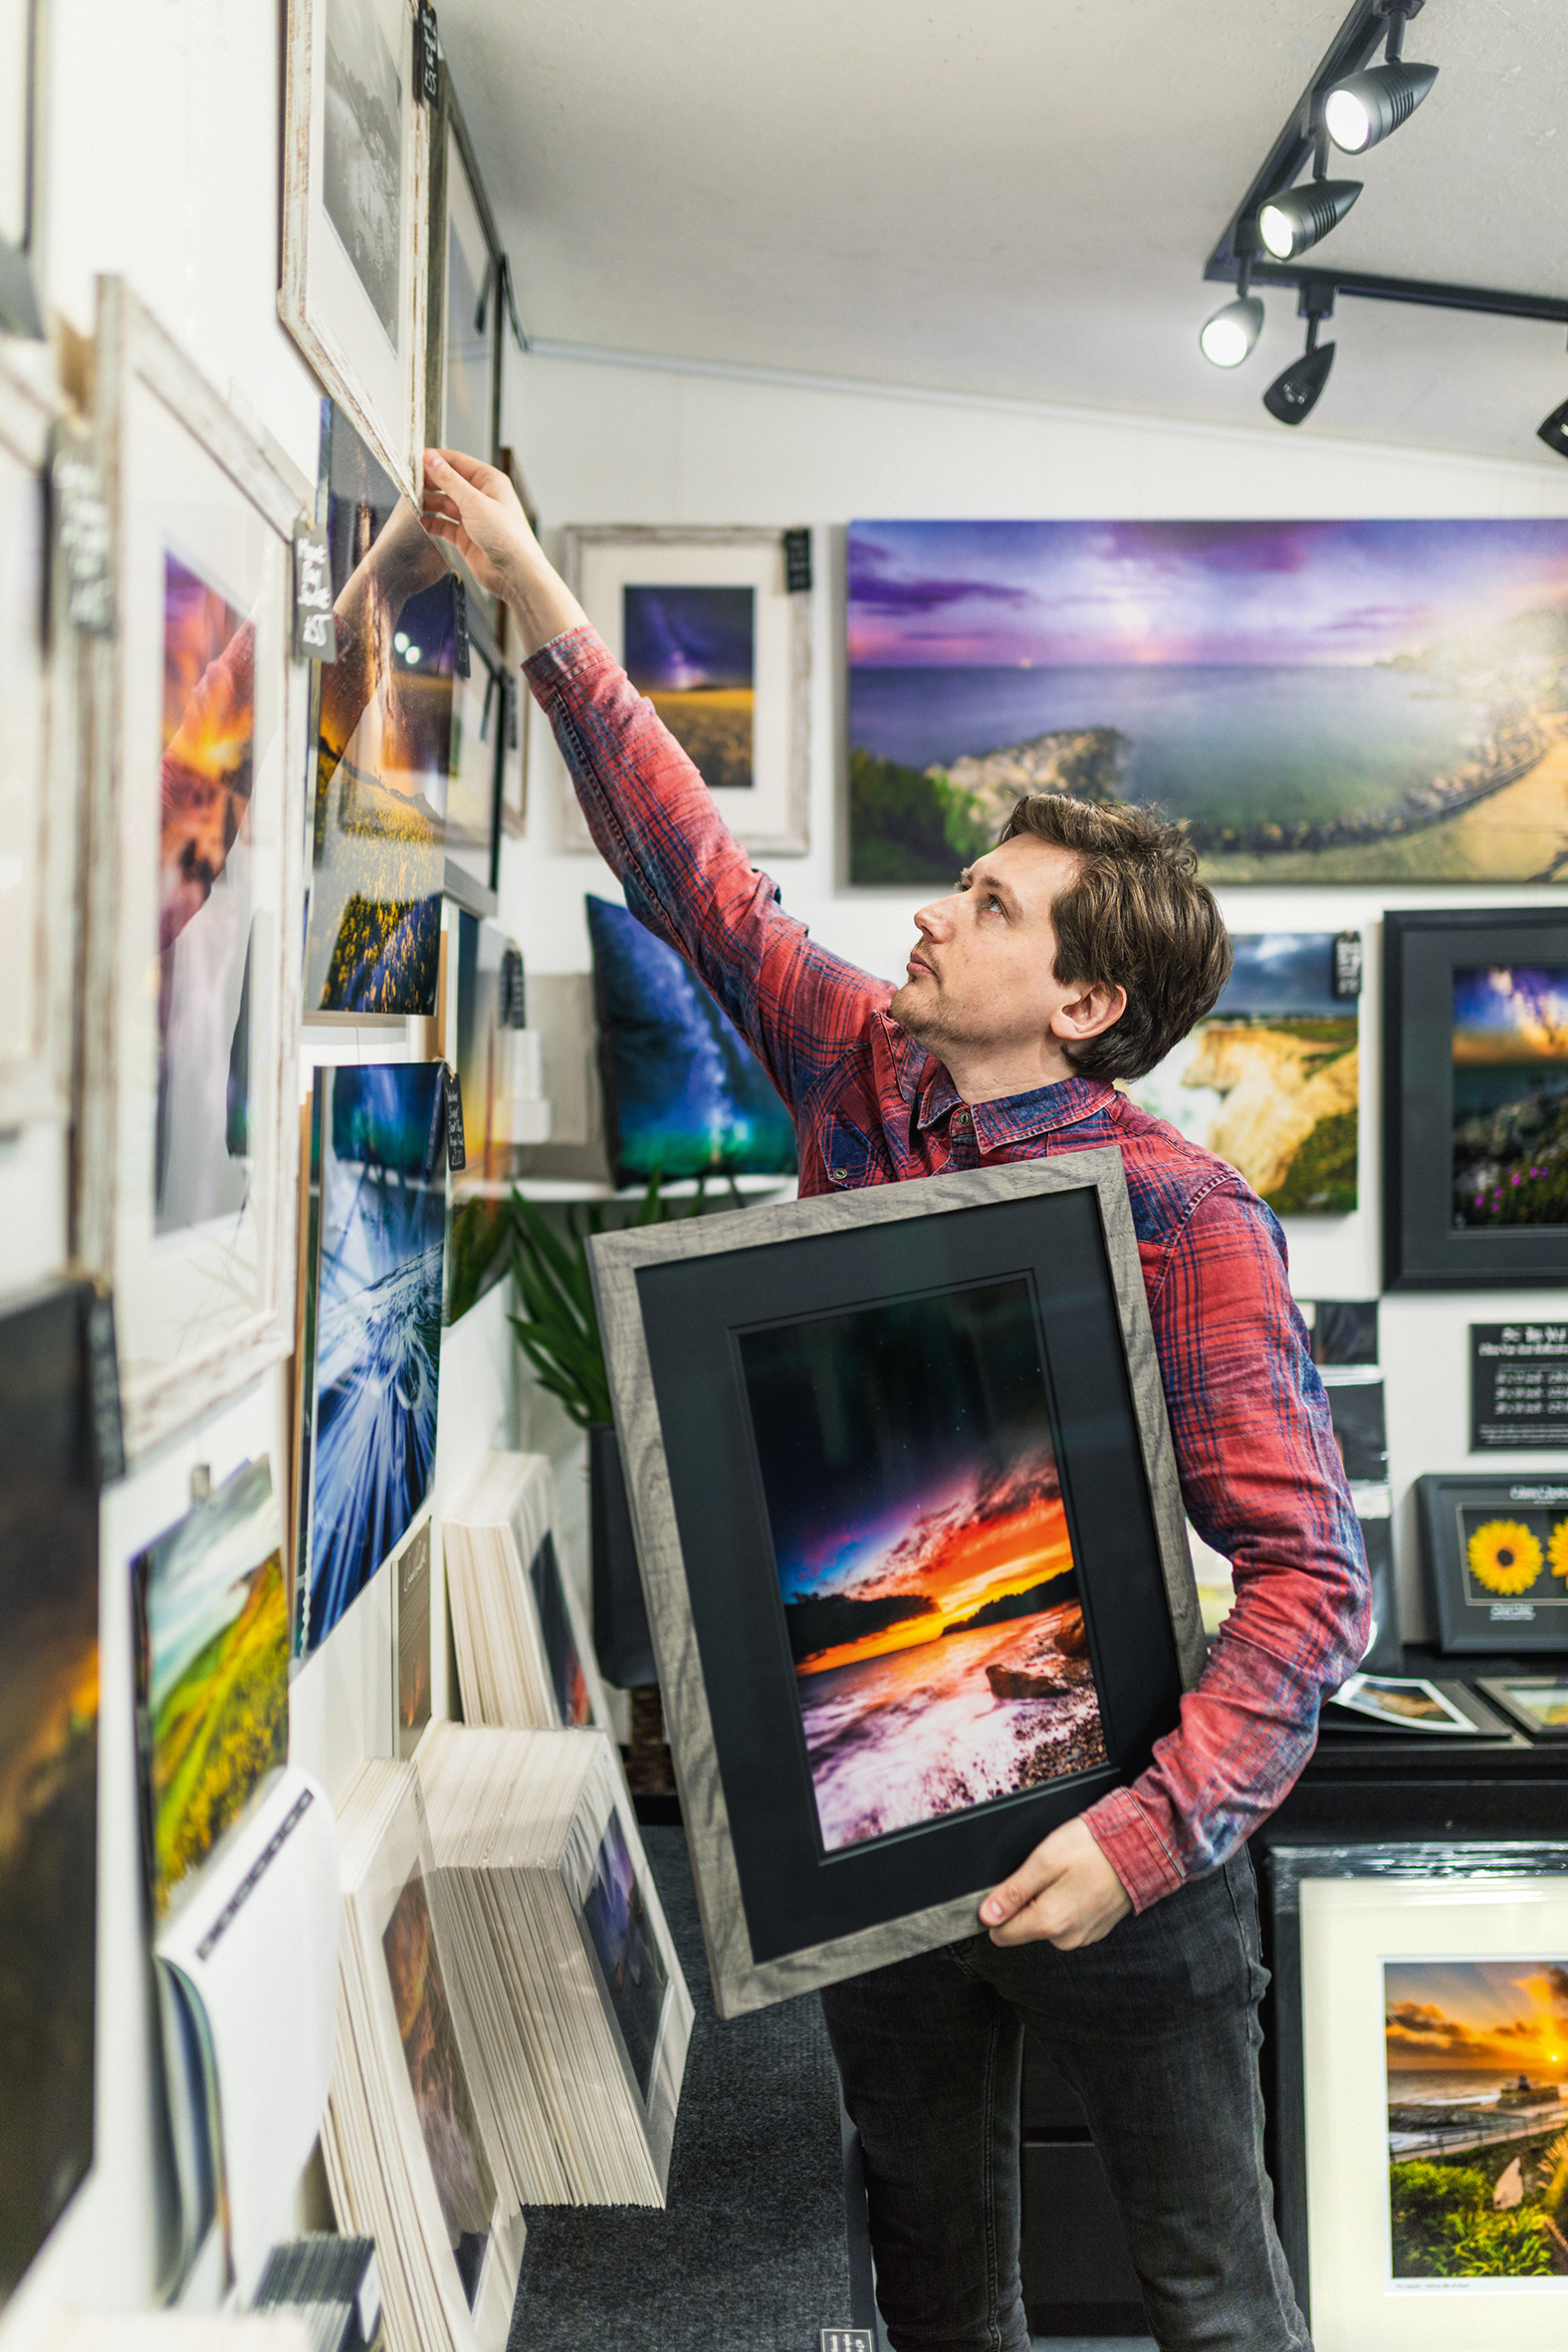 Photographer Chad Powell in his studio on the Isle of Wight hanging pictures